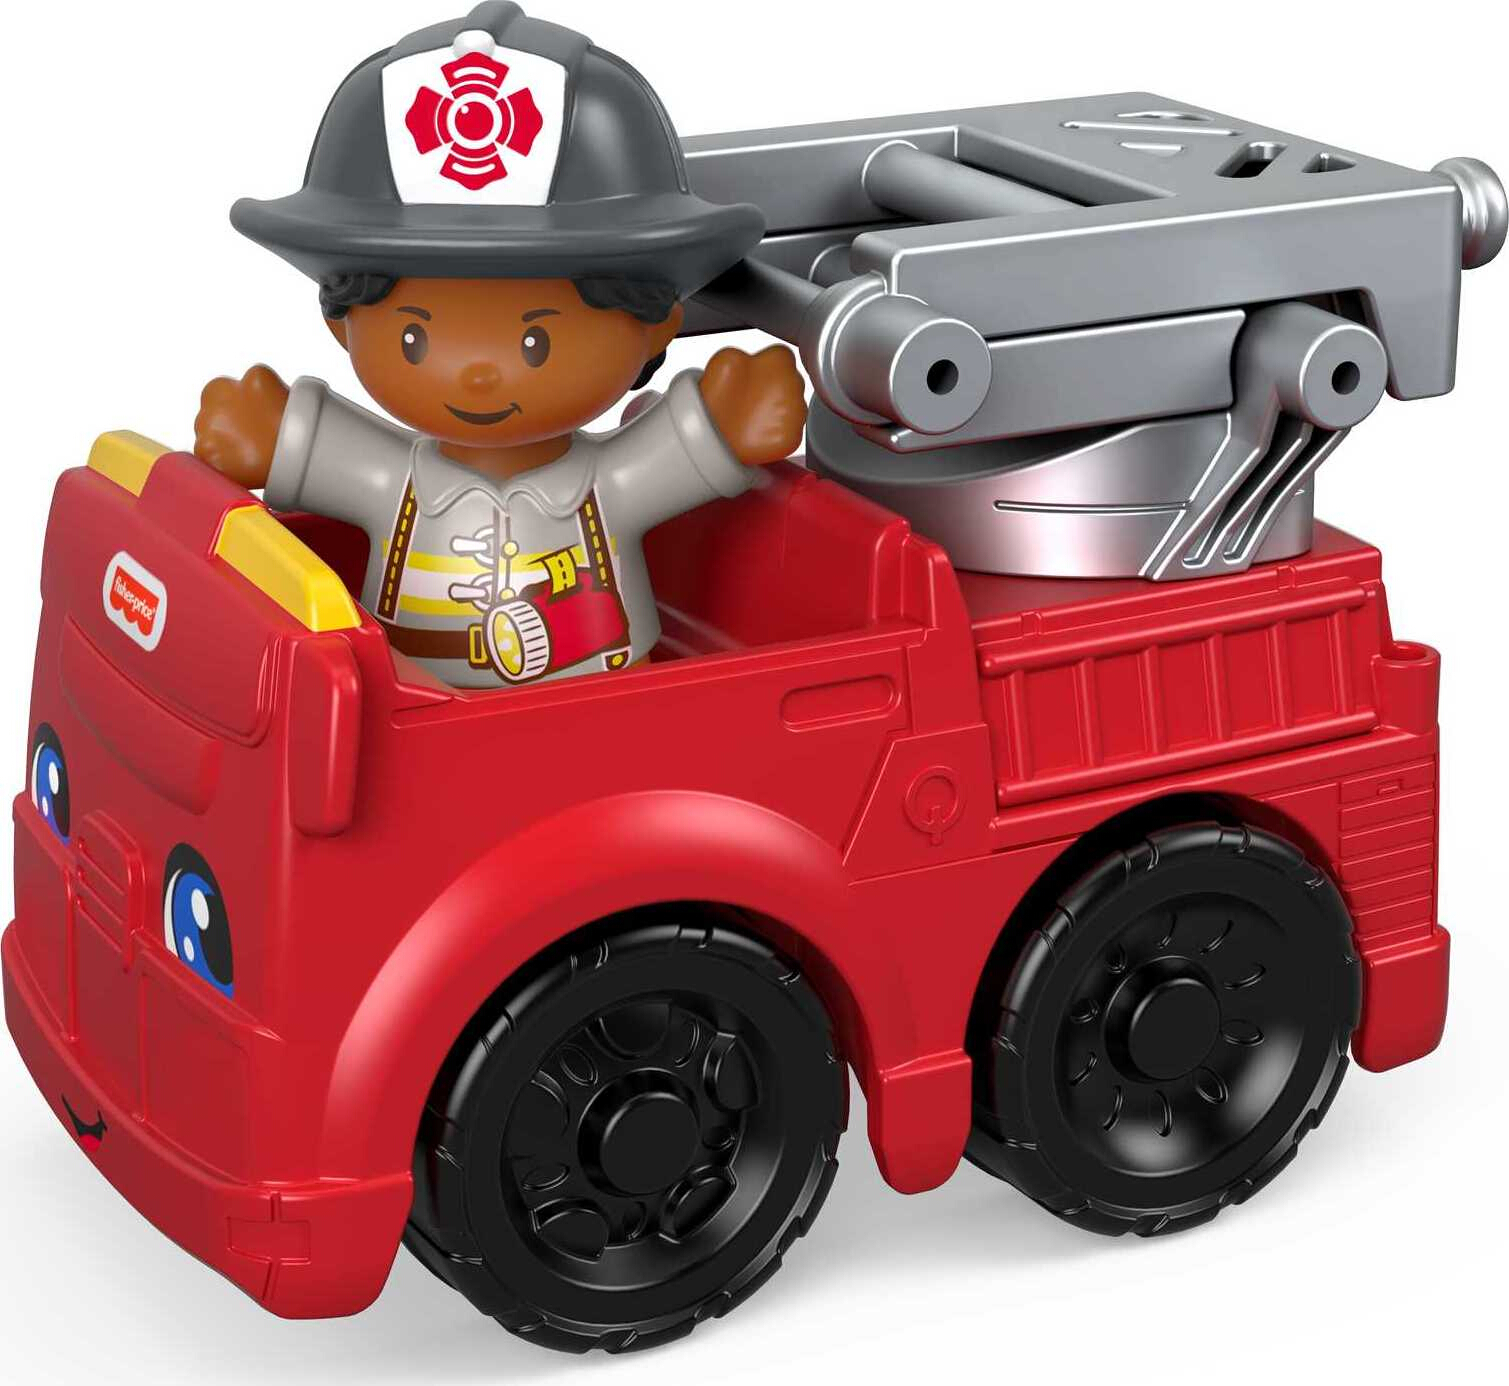 Fisher-Price Little People To the Rescue Fire Truck & Firefighter Figure for Toddlers - image 1 of 6